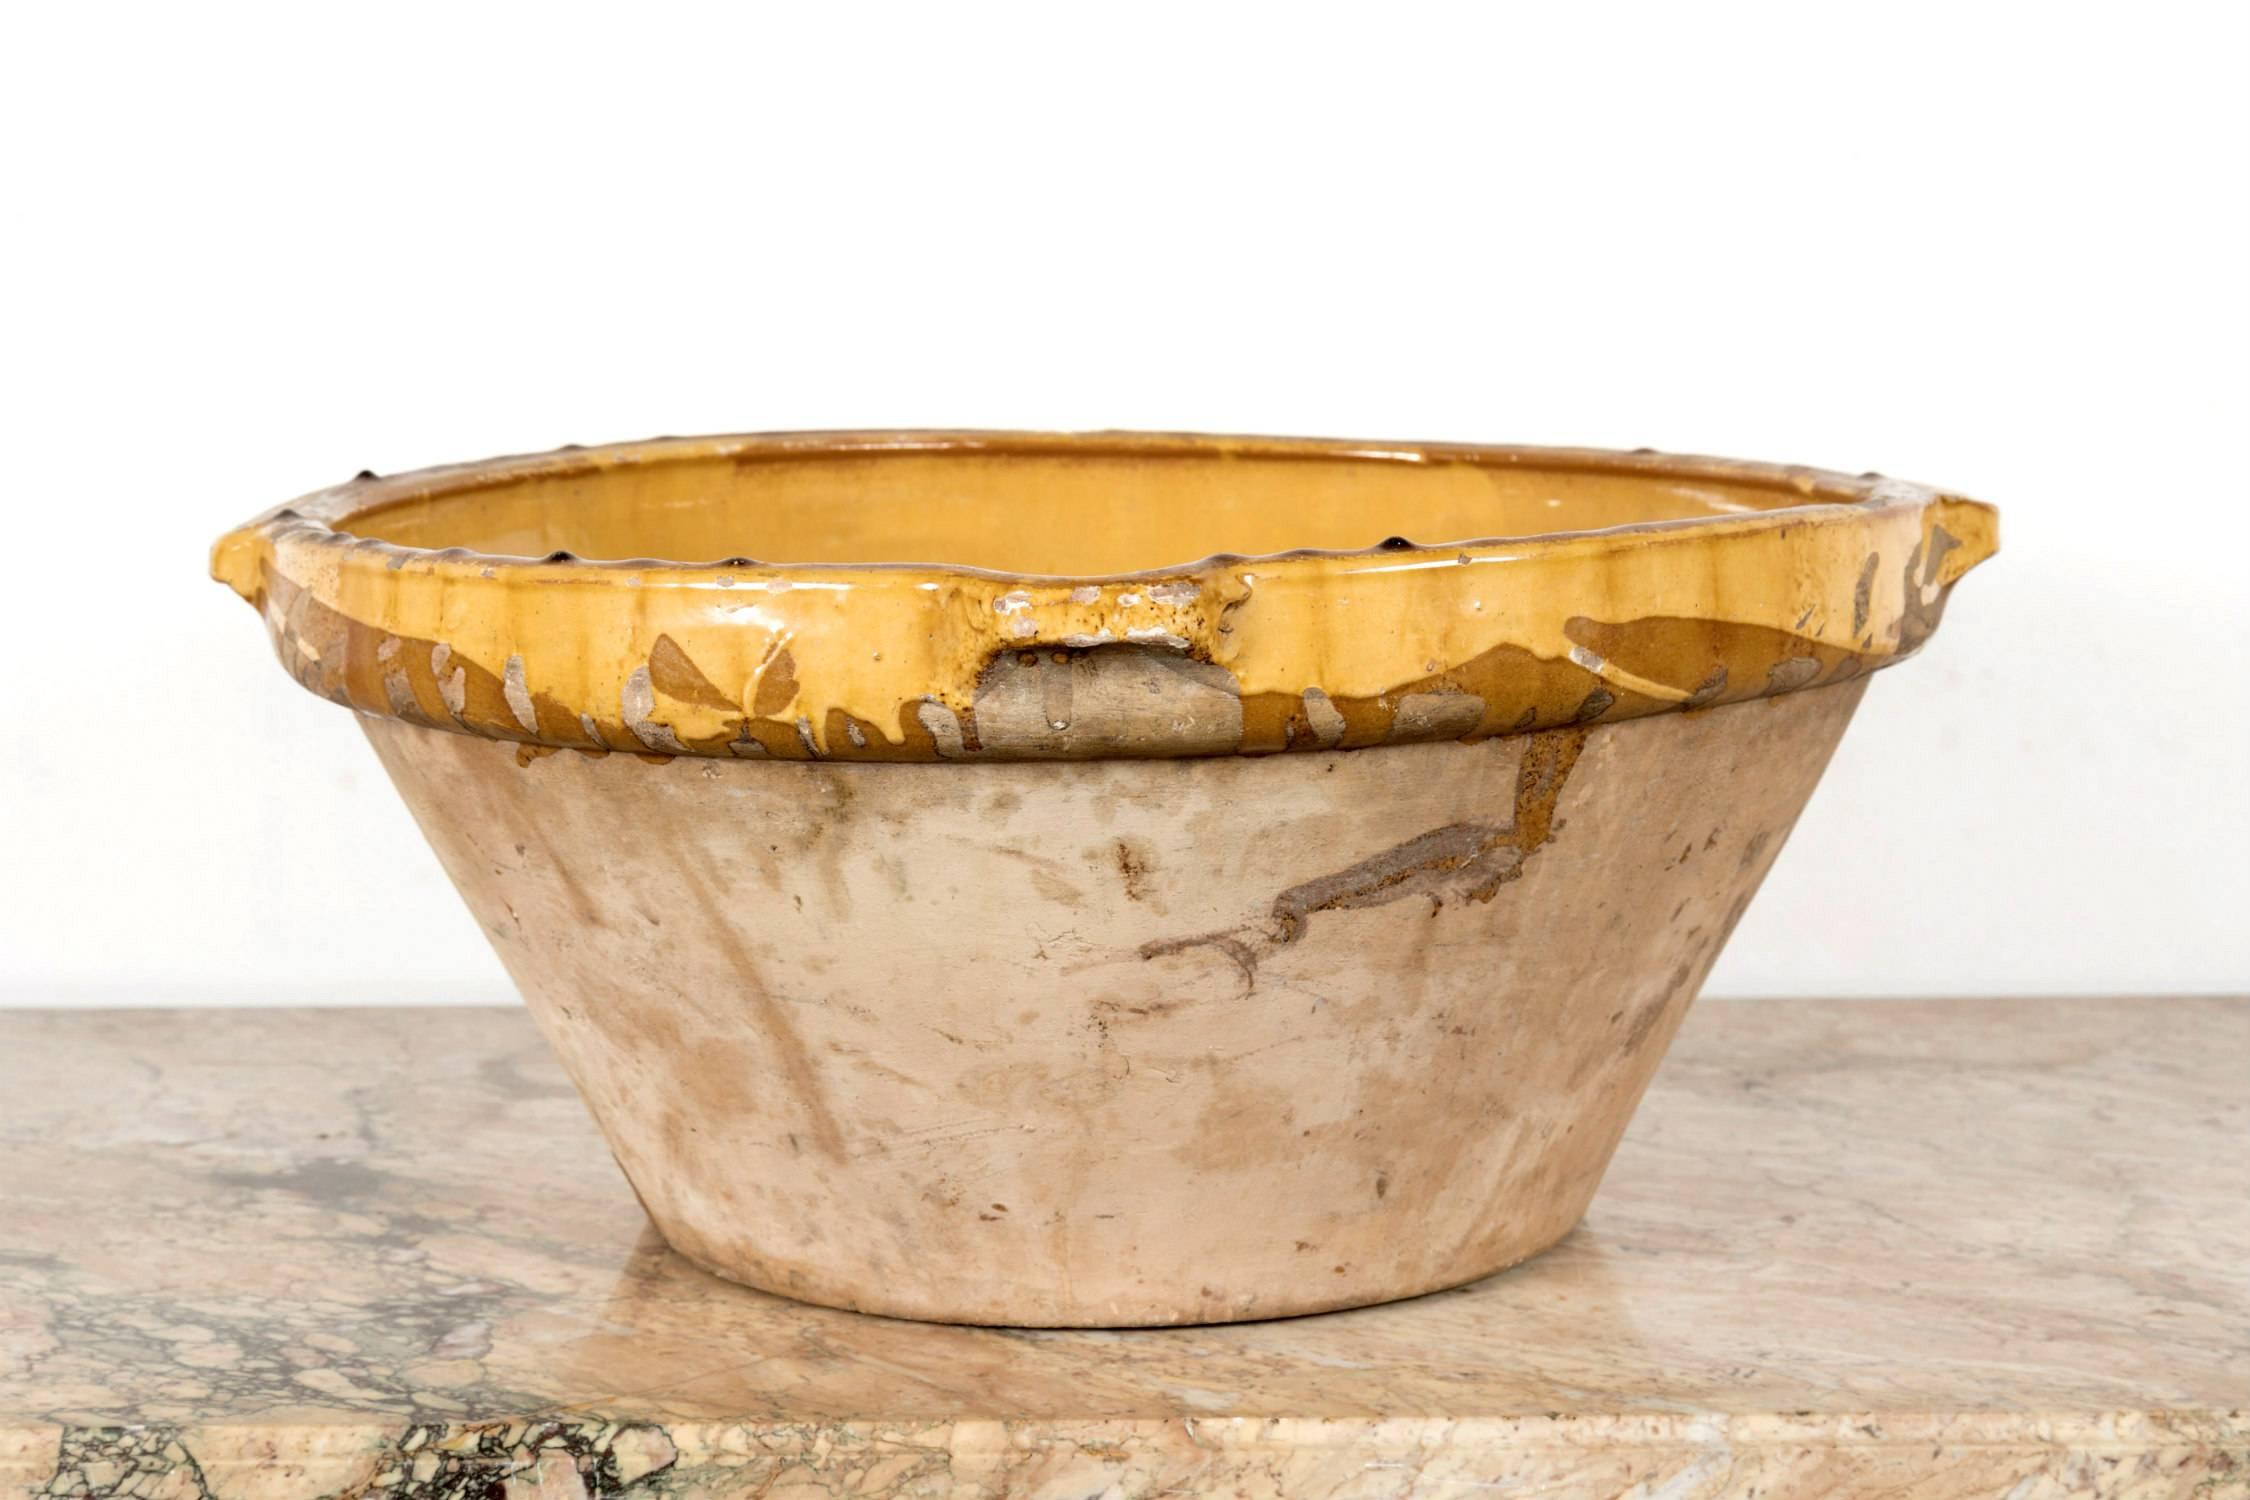 Lovely 19th century French terracotta bowl, known as a tian, once used to prepare and cook boudin noir or cassoulet. This round handmade terracotta bowl from southwest France features two small handles, a lip for pouring, and has a Provencal yellow